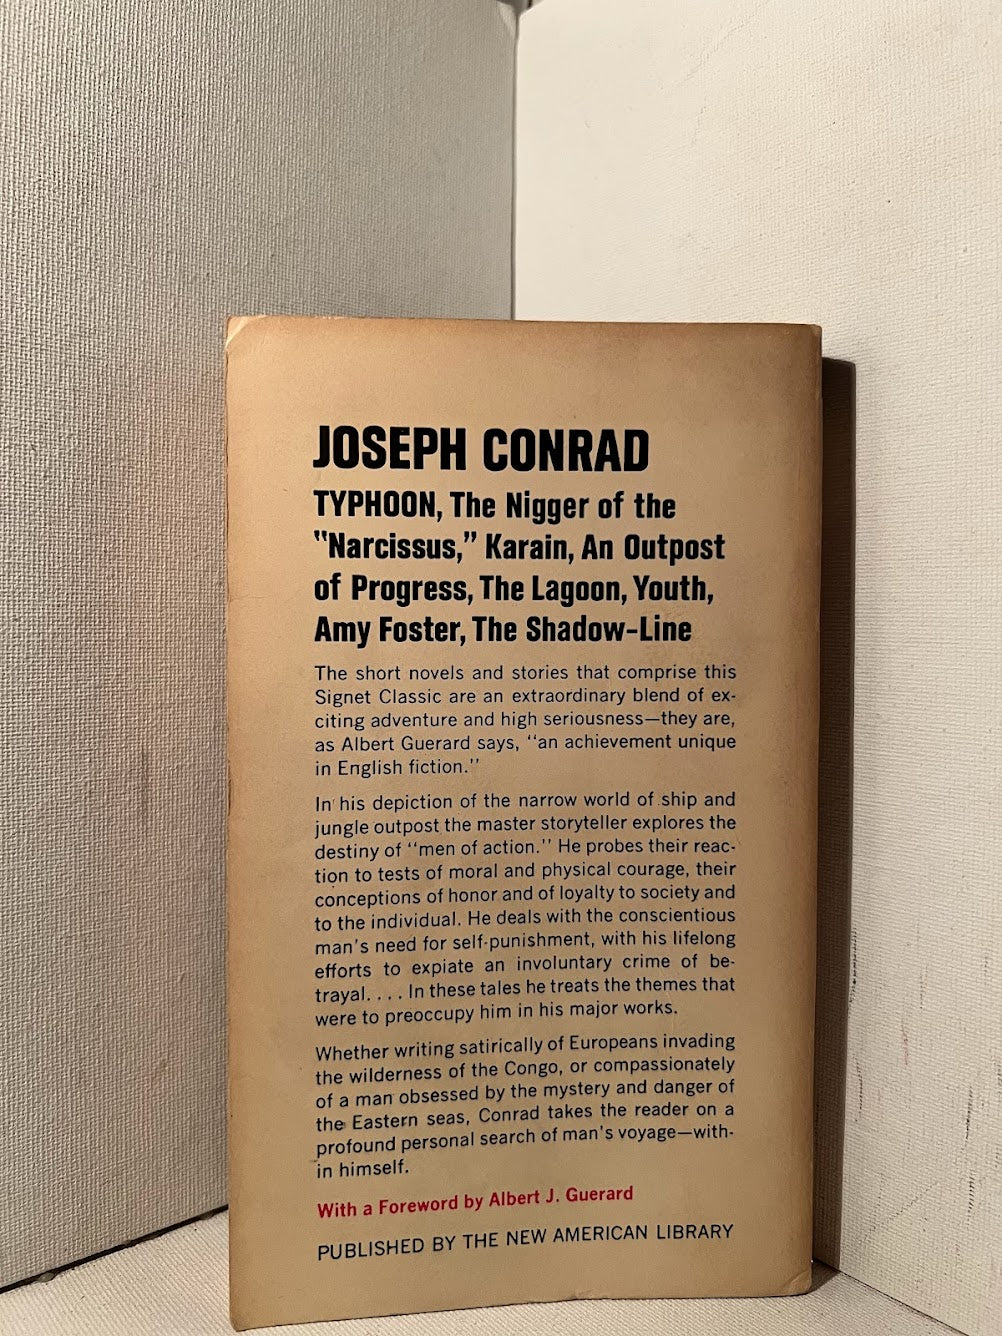 Typhoon and Other Tales by Joseph Conrad